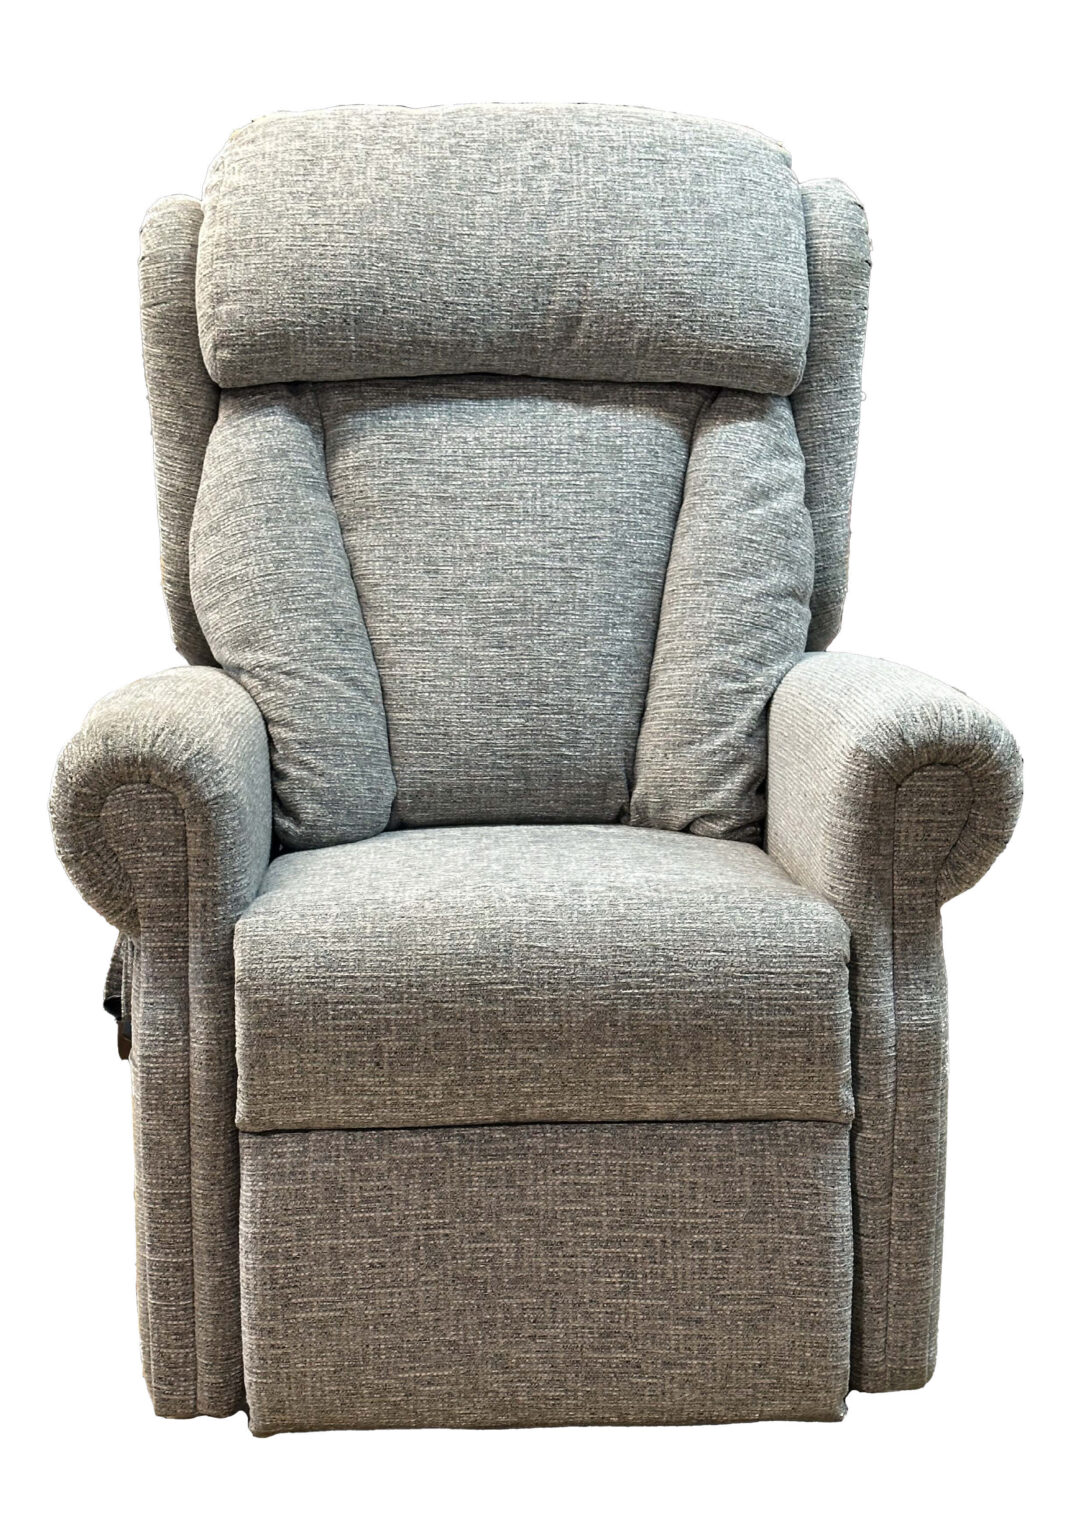 Nidderdale Armchair Side View - Rise Recline Chair in Floral Oatmeal Fabric.